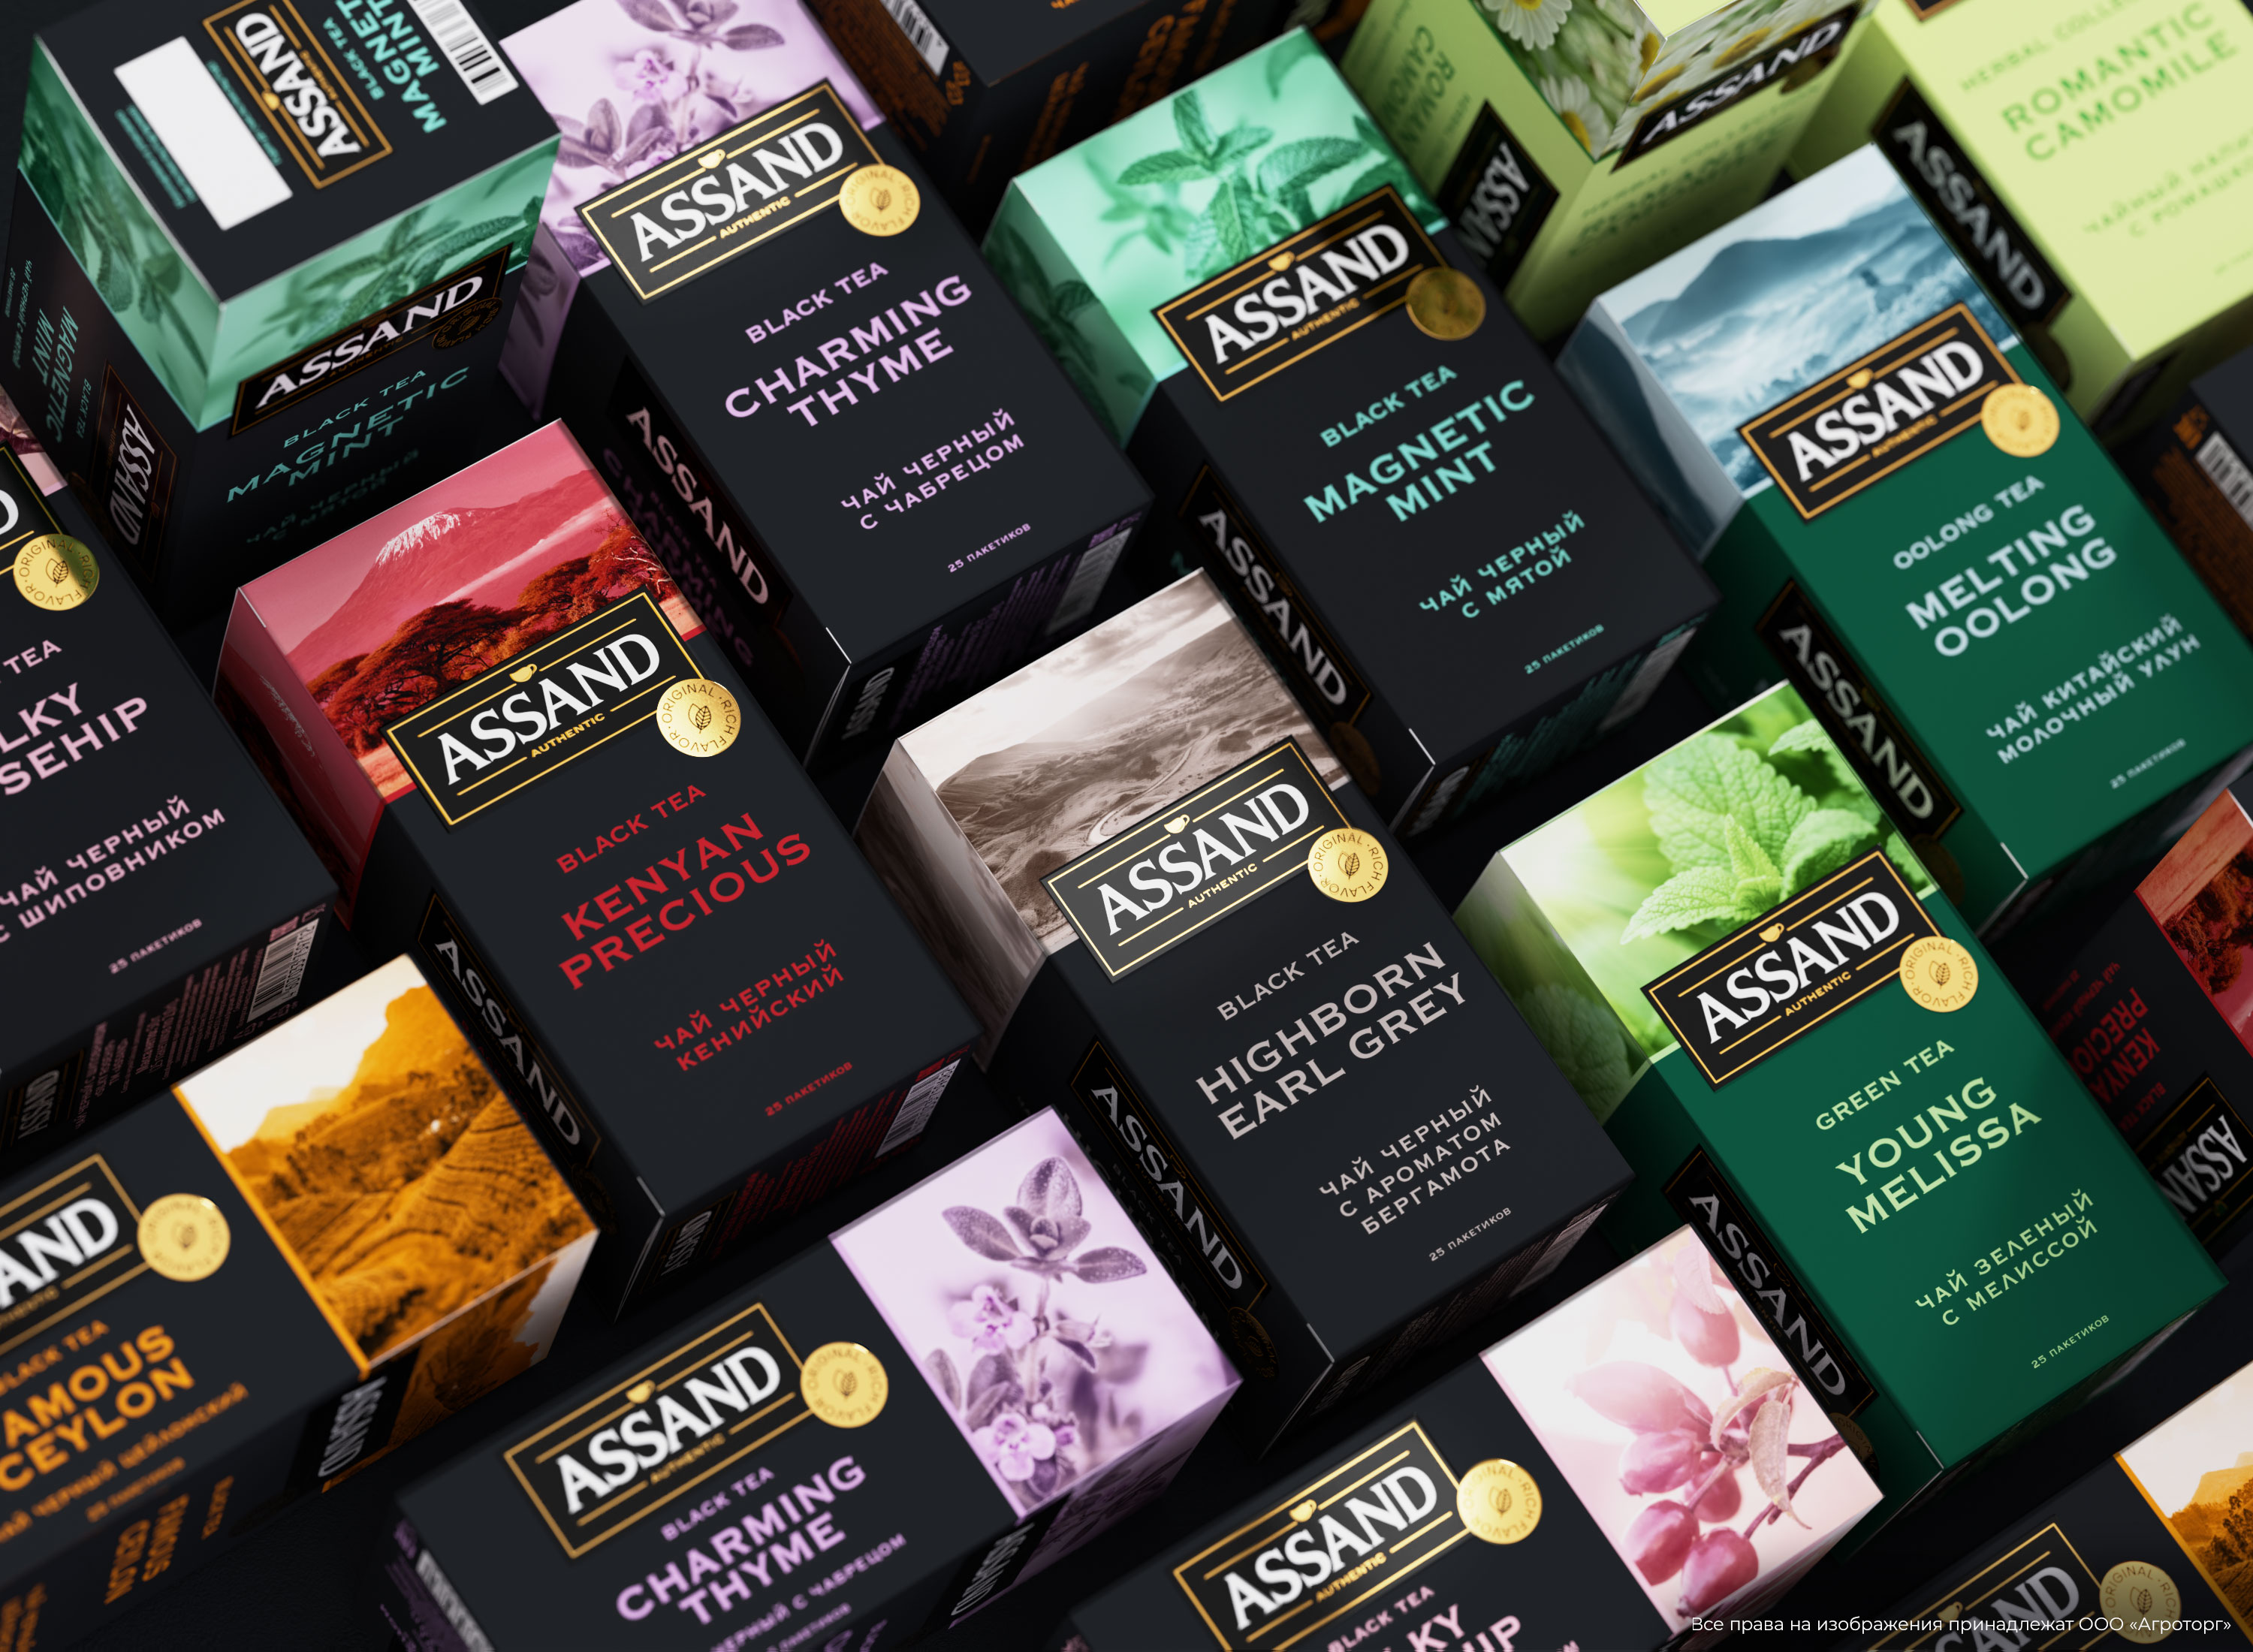 Up-to-date Approach to Naming and Design for Assand Tea Brand